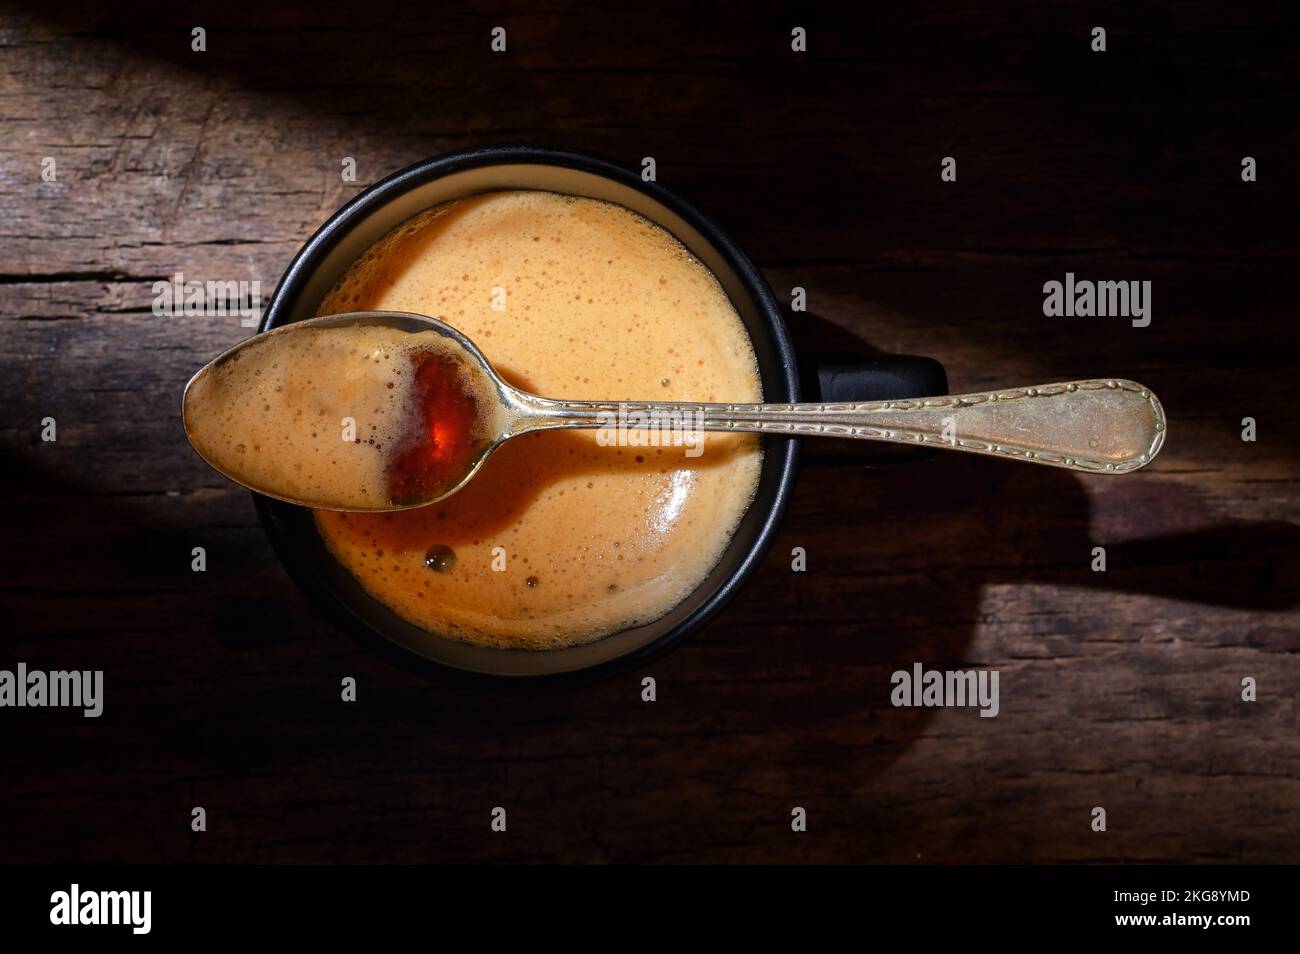 Black Espresso Cup and Spoon with Foam on Wooden Table Stock Photo